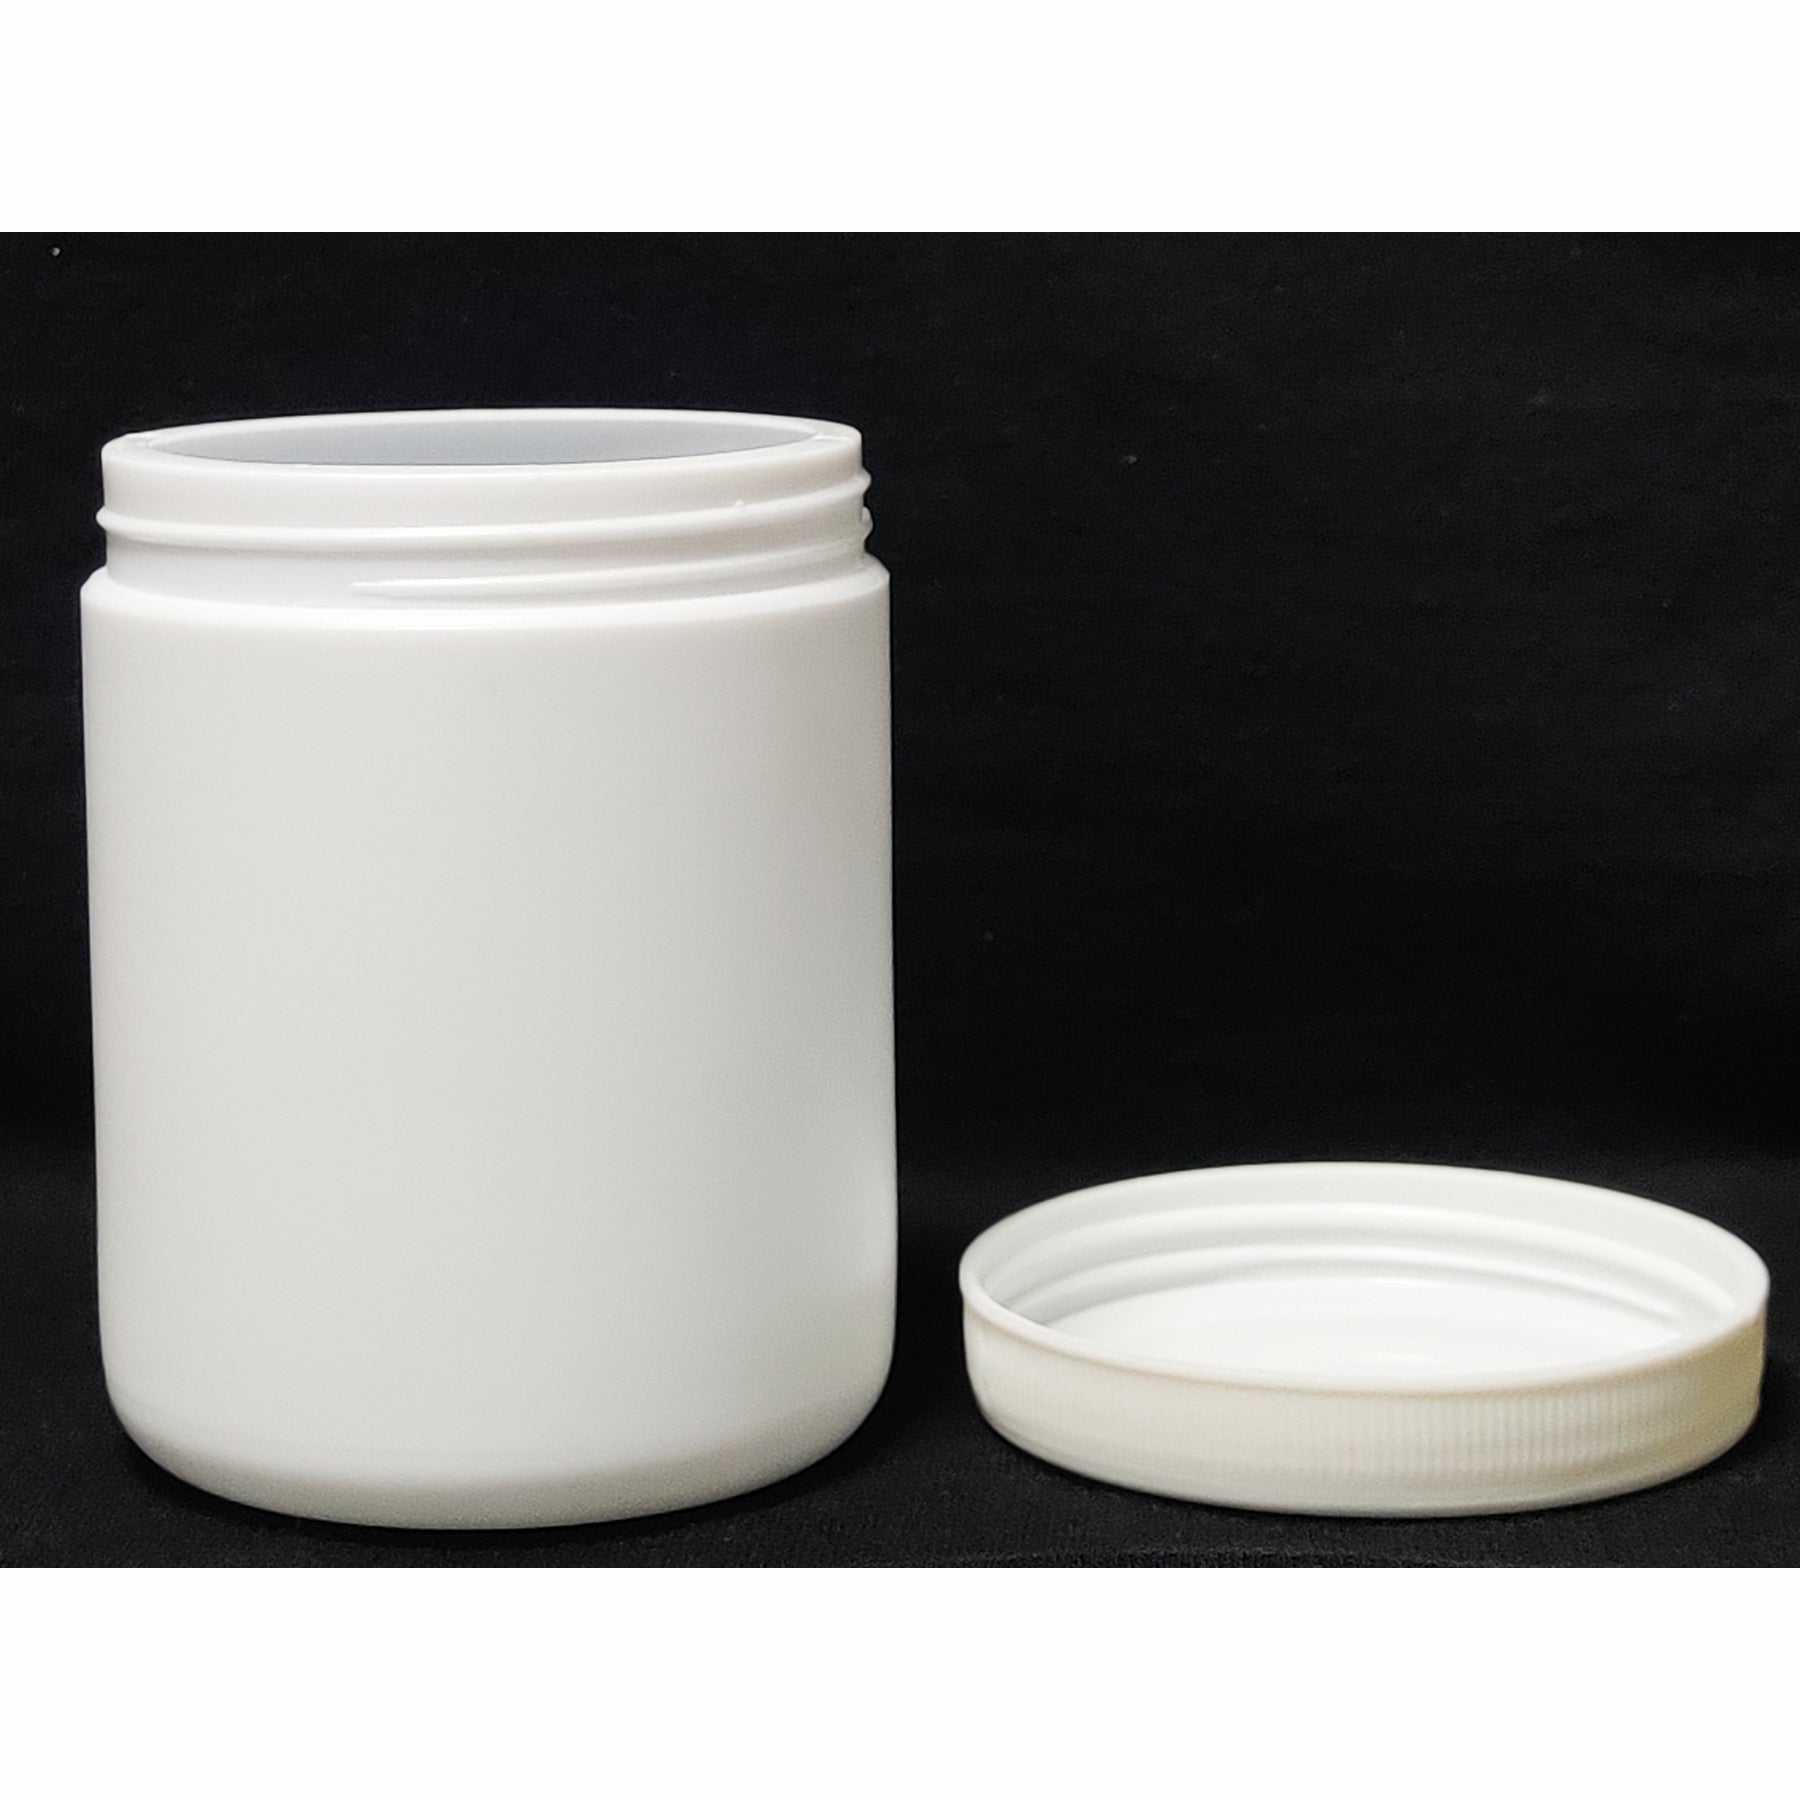 300ml White HDPE Empty Jar for Secure Storage., Patco Pharma, Plastic Containers, 300ml-white-hdpe-empty-container-for-ayurvedic-powder-storage-air-tight, 300ml container, Ayurvedic Powders, Freshness Guarantee, HDPE Jar, Hygiene Assurance, Medication Storage, Medicine Storage, Moisture Protection, Patco Pharma, Pharma Manufacturer, Pharmaceutical Jar, Pharmaceutical Packaging, Pharmaceutical Storage, Plastic Containers, Quality Assurance, Storage Solutions, Travel-friendly, Patco Pharma